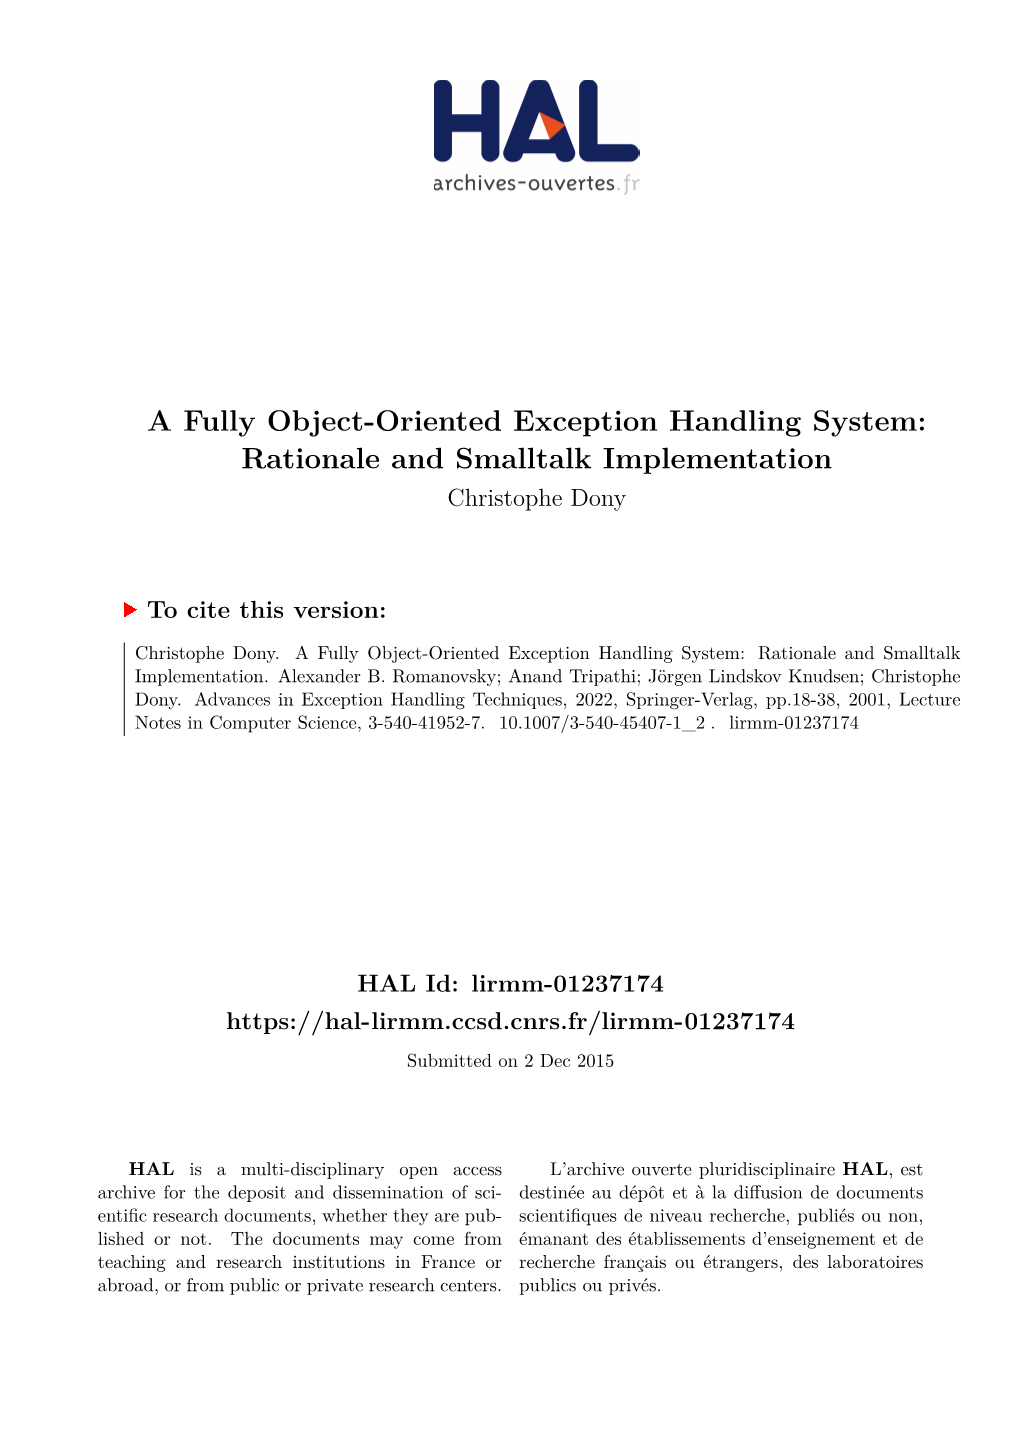 A Fully Object-Oriented Exception Handling System: Rationale and Smalltalk Implementation Christophe Dony